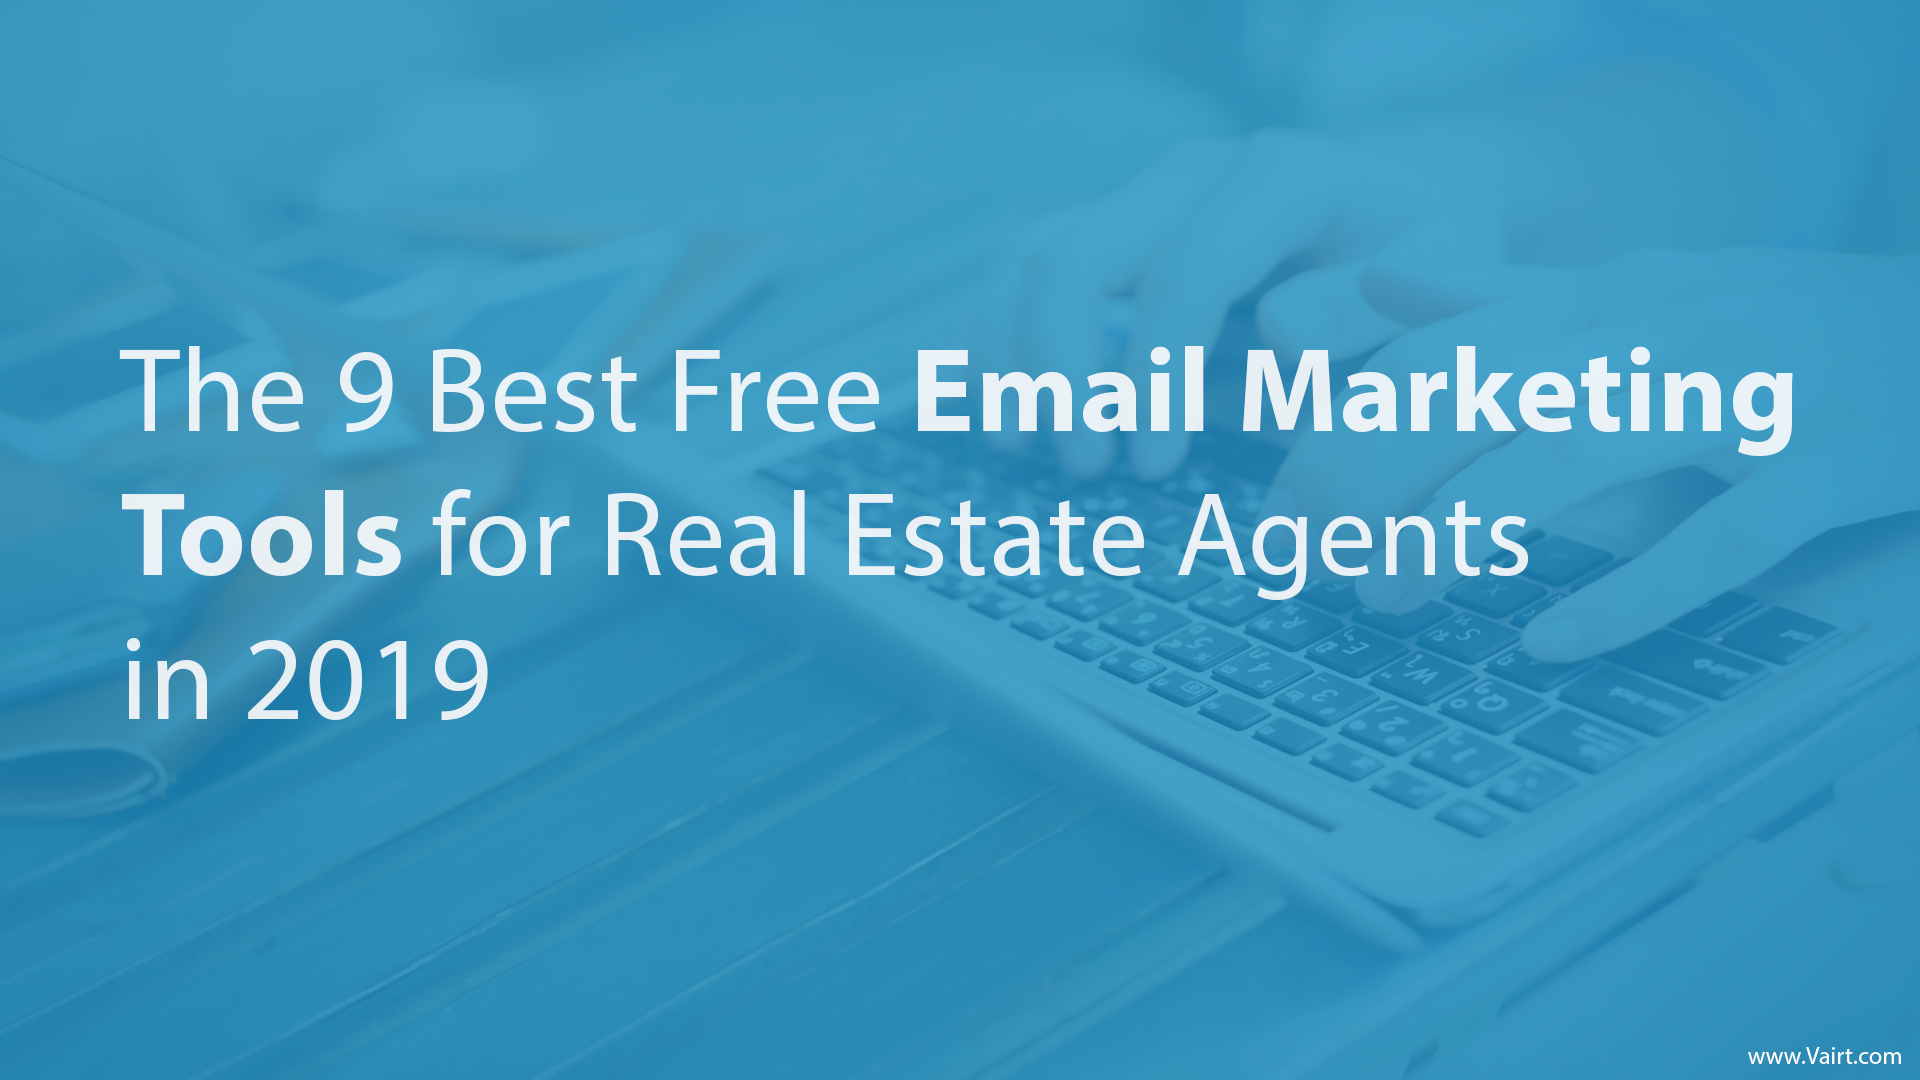 Email Marketing Tools for Real Estate Agents